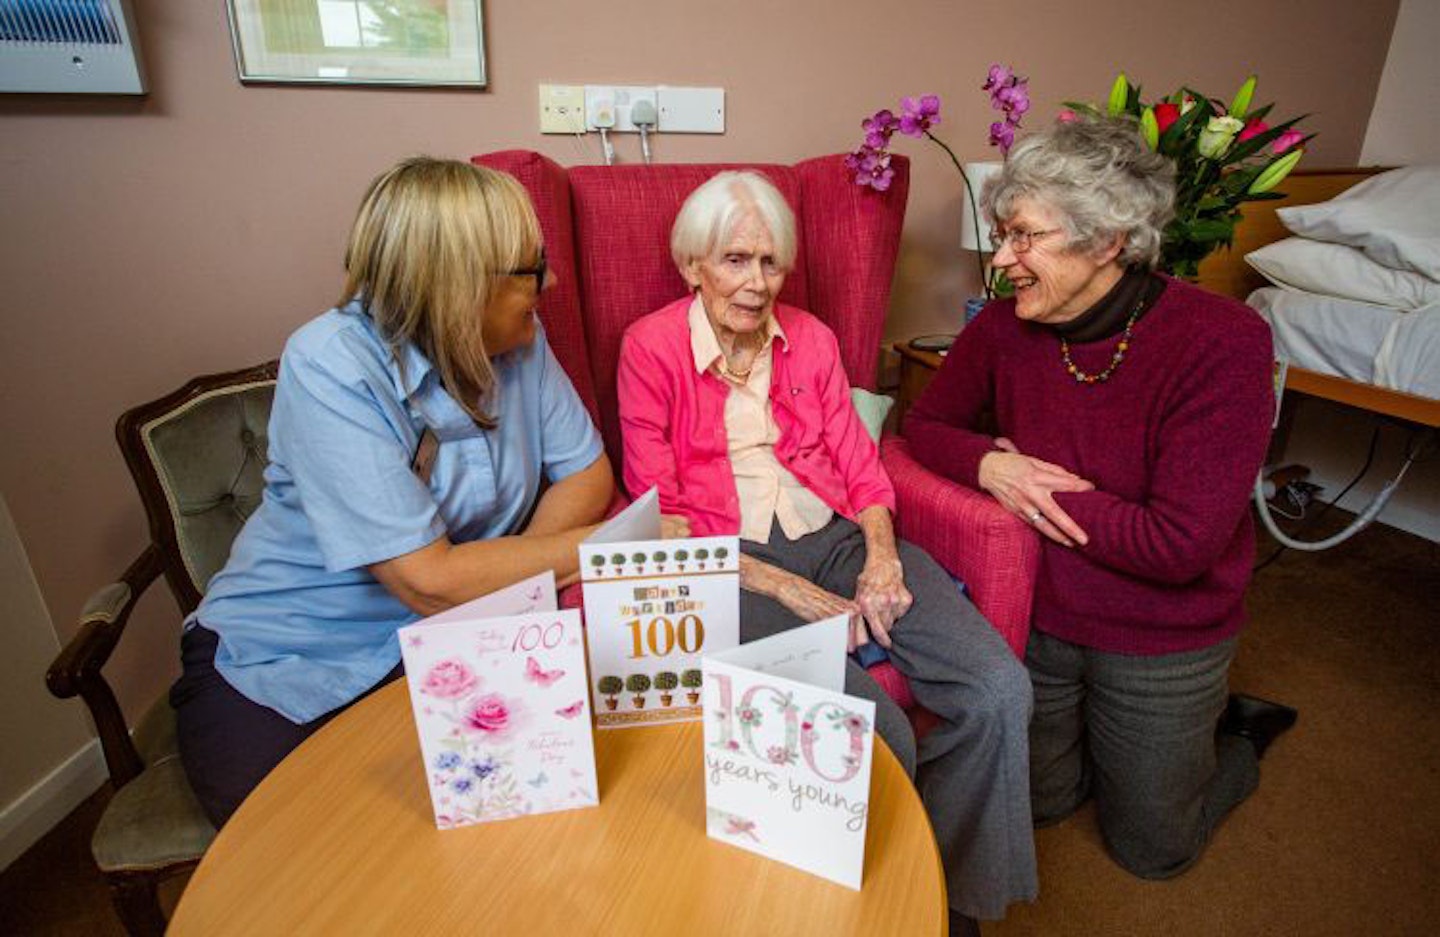 From left, Activity Coordinator Mandy King, Hilary Don-Fox and her daughter Harriet Atwood, at The Mellowes care home in Gillingham, Dorset